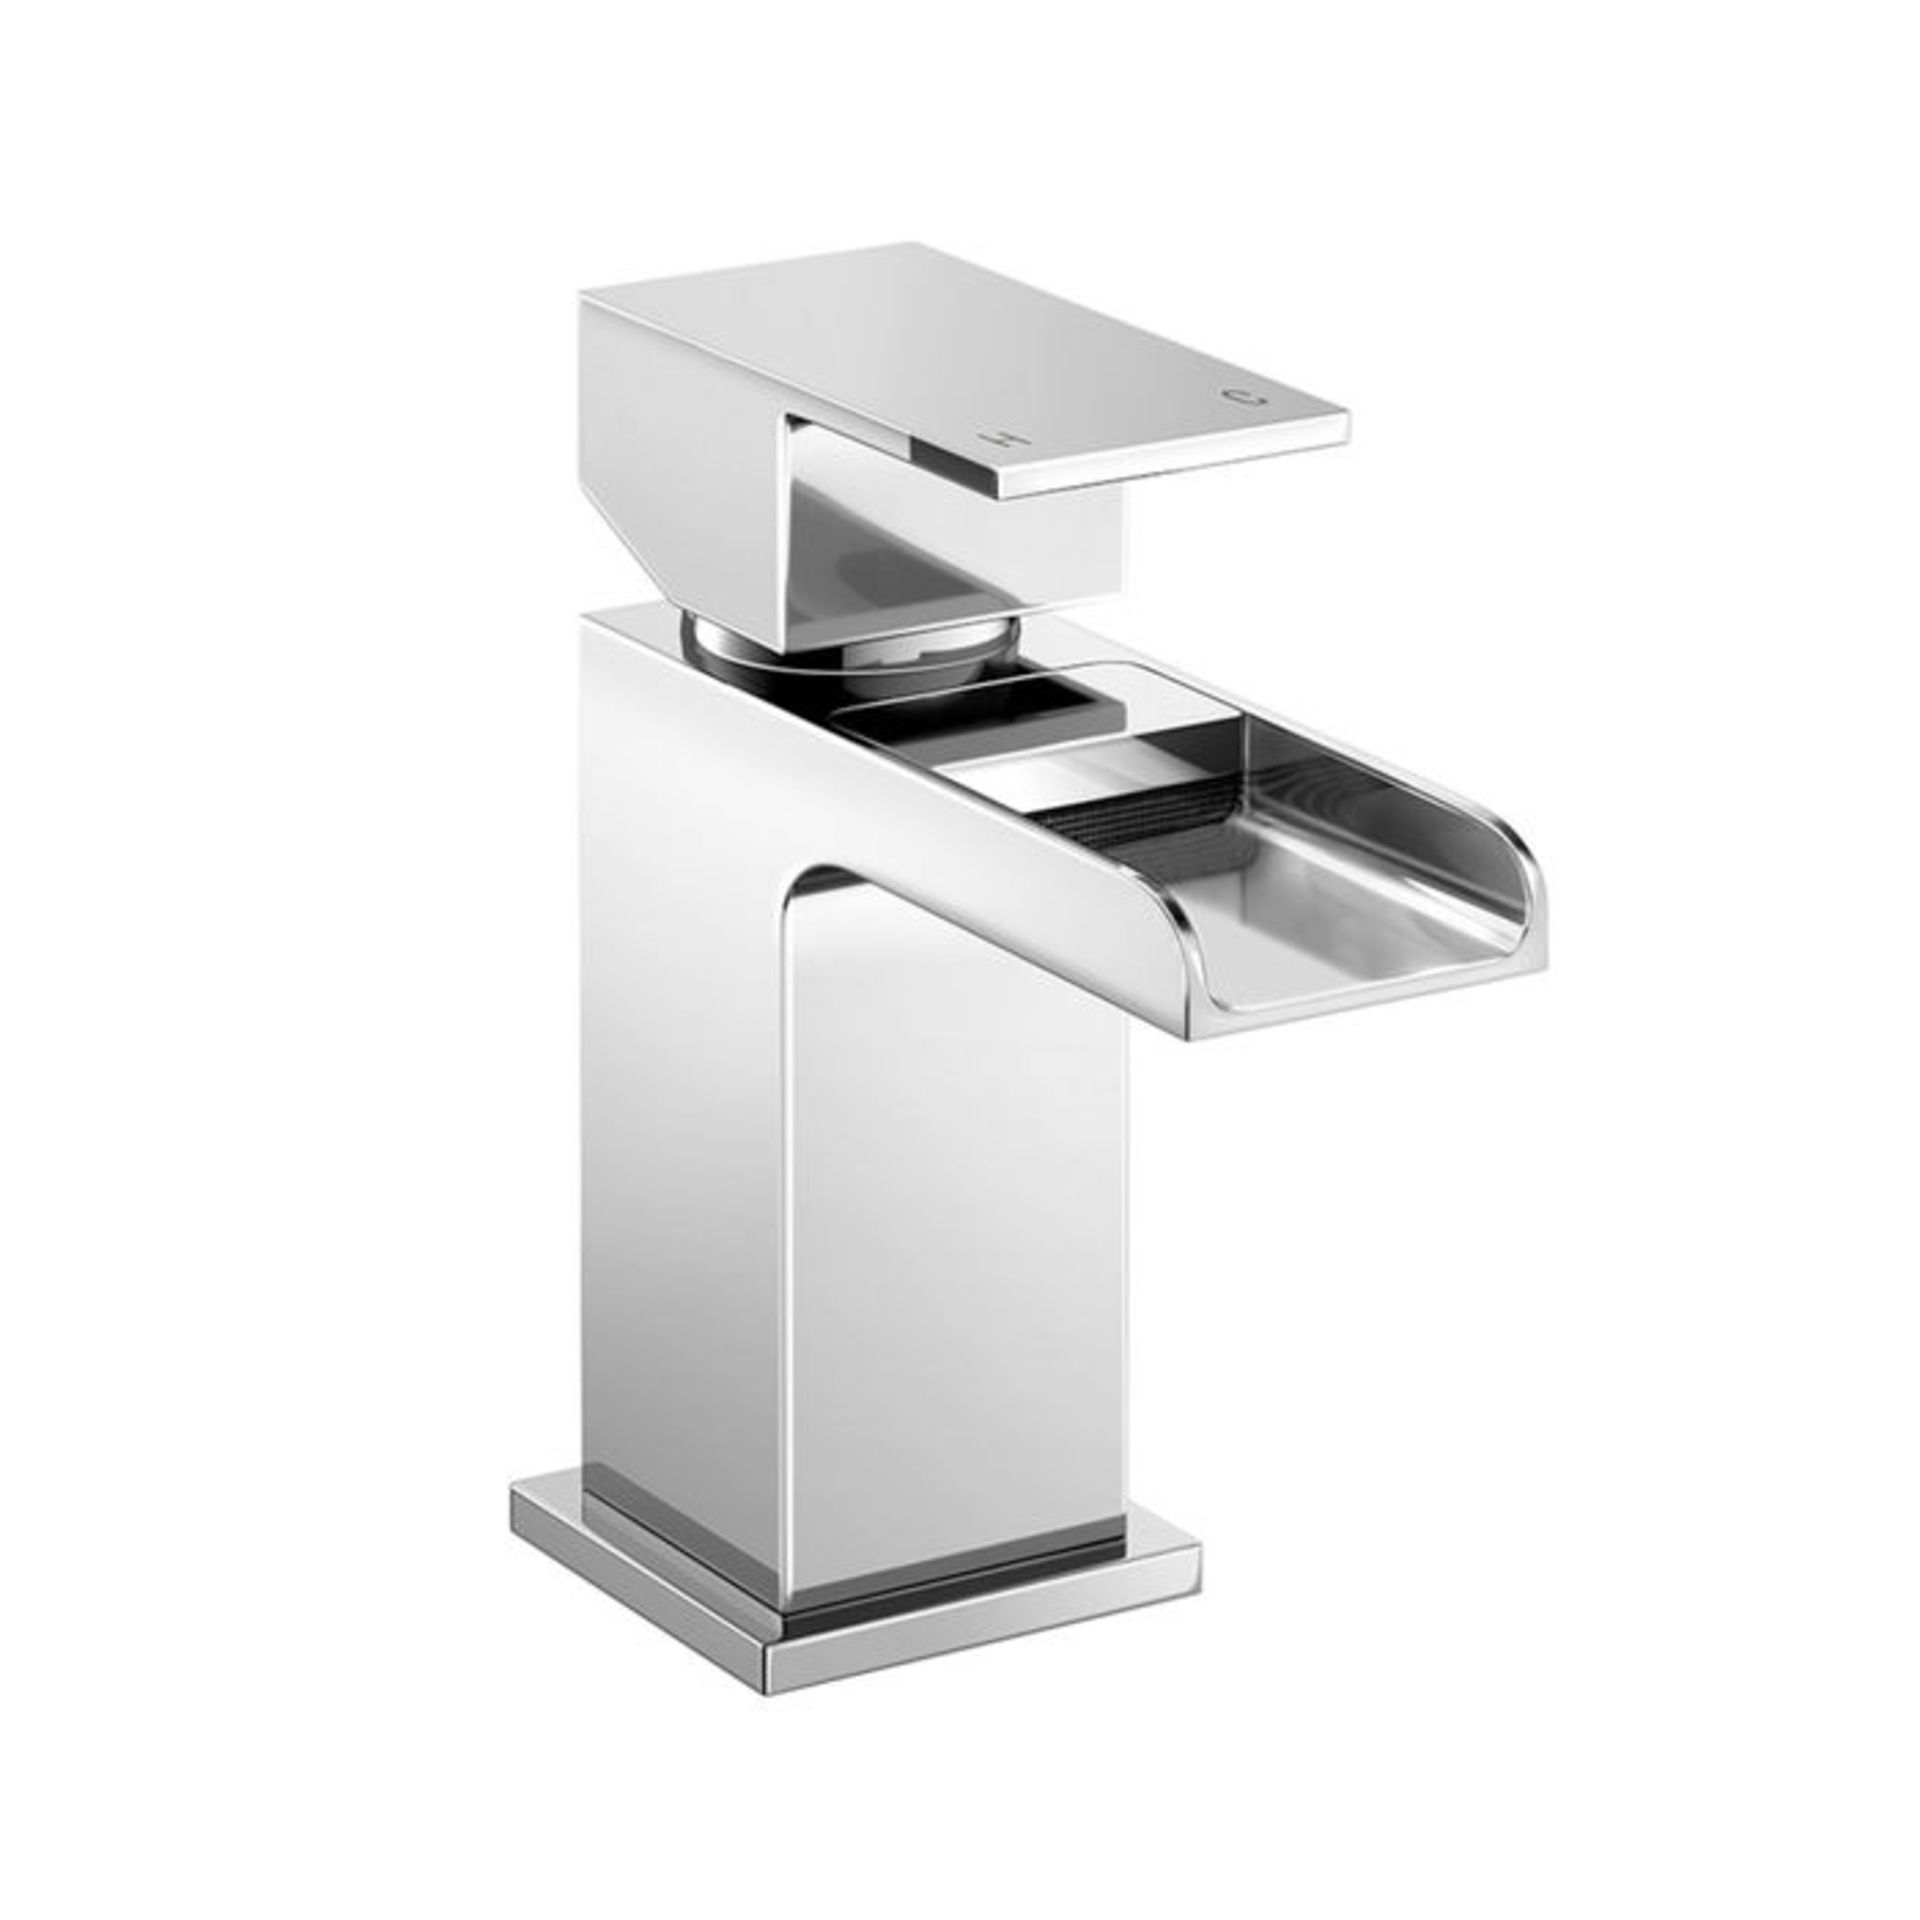 (AL37) Niagra II Cloakroom Basin Mixer Tap Chrome plated corrosion free. Crafted from chrome plated,